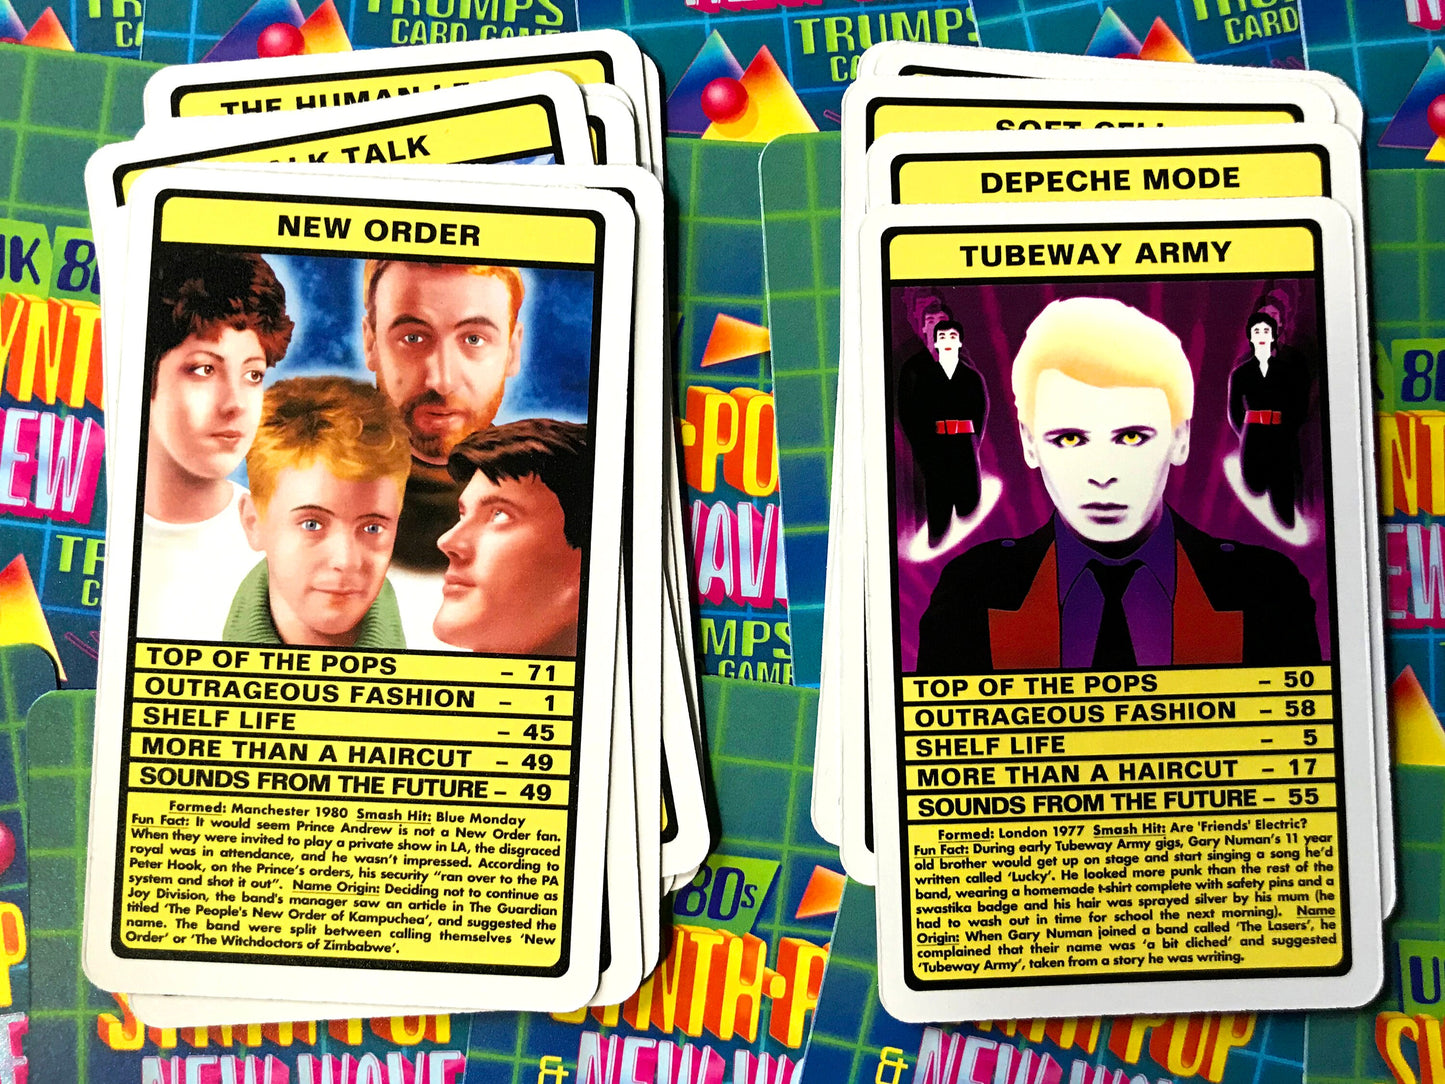 UK 80s SYNTH-POP & NEW WAVE  TRUMPS